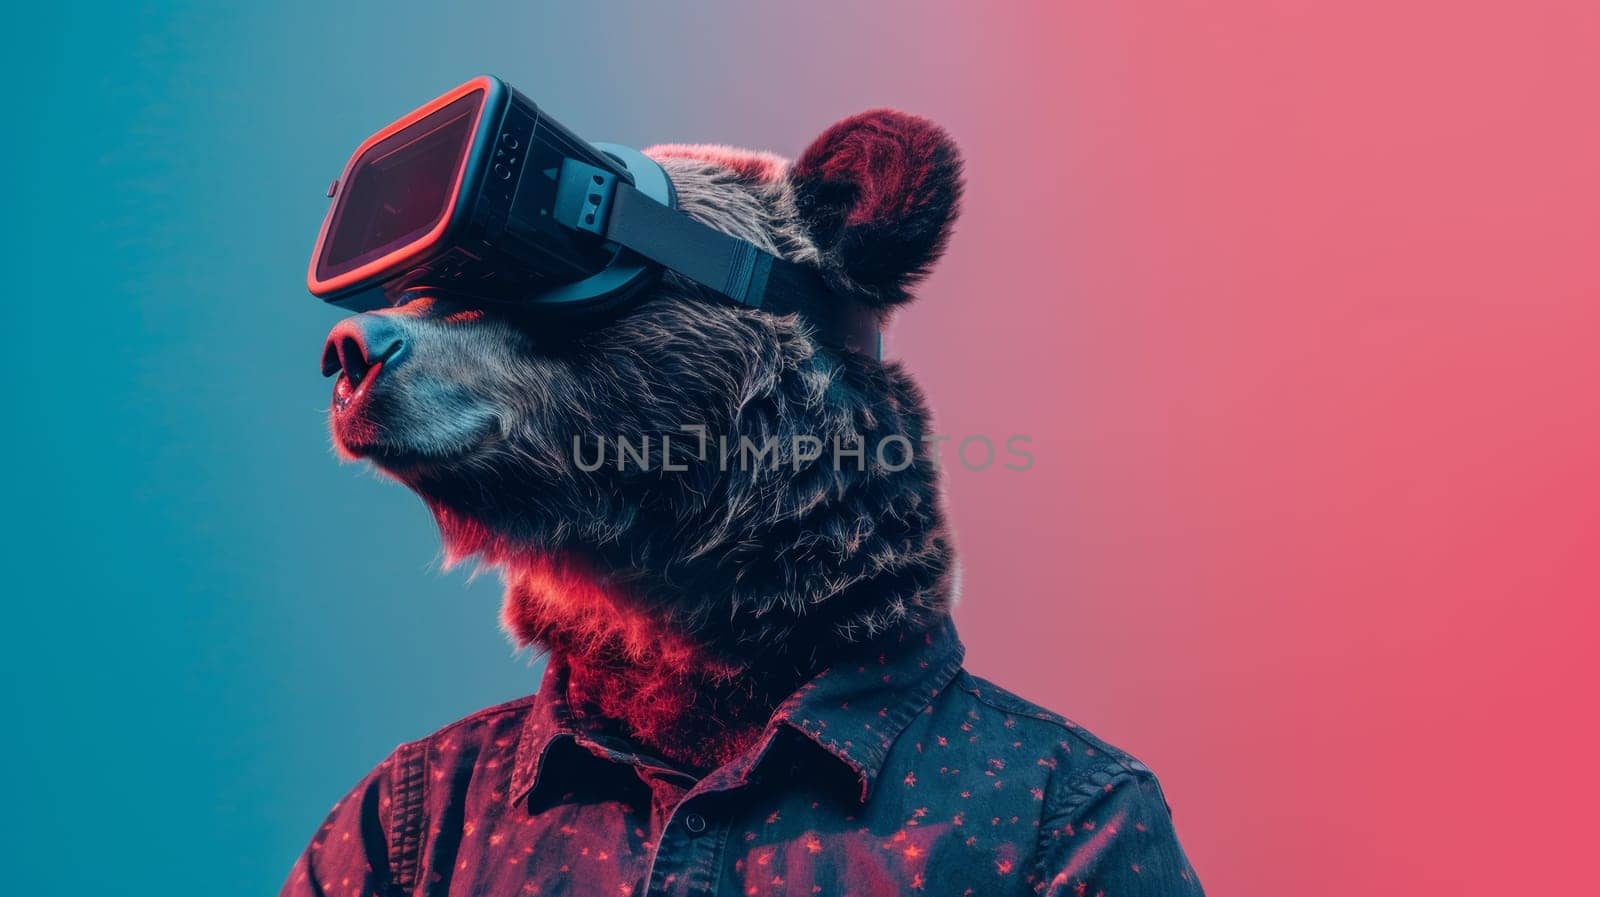 A bear wearing a vr headset with the words "i'm not afraid of anything"